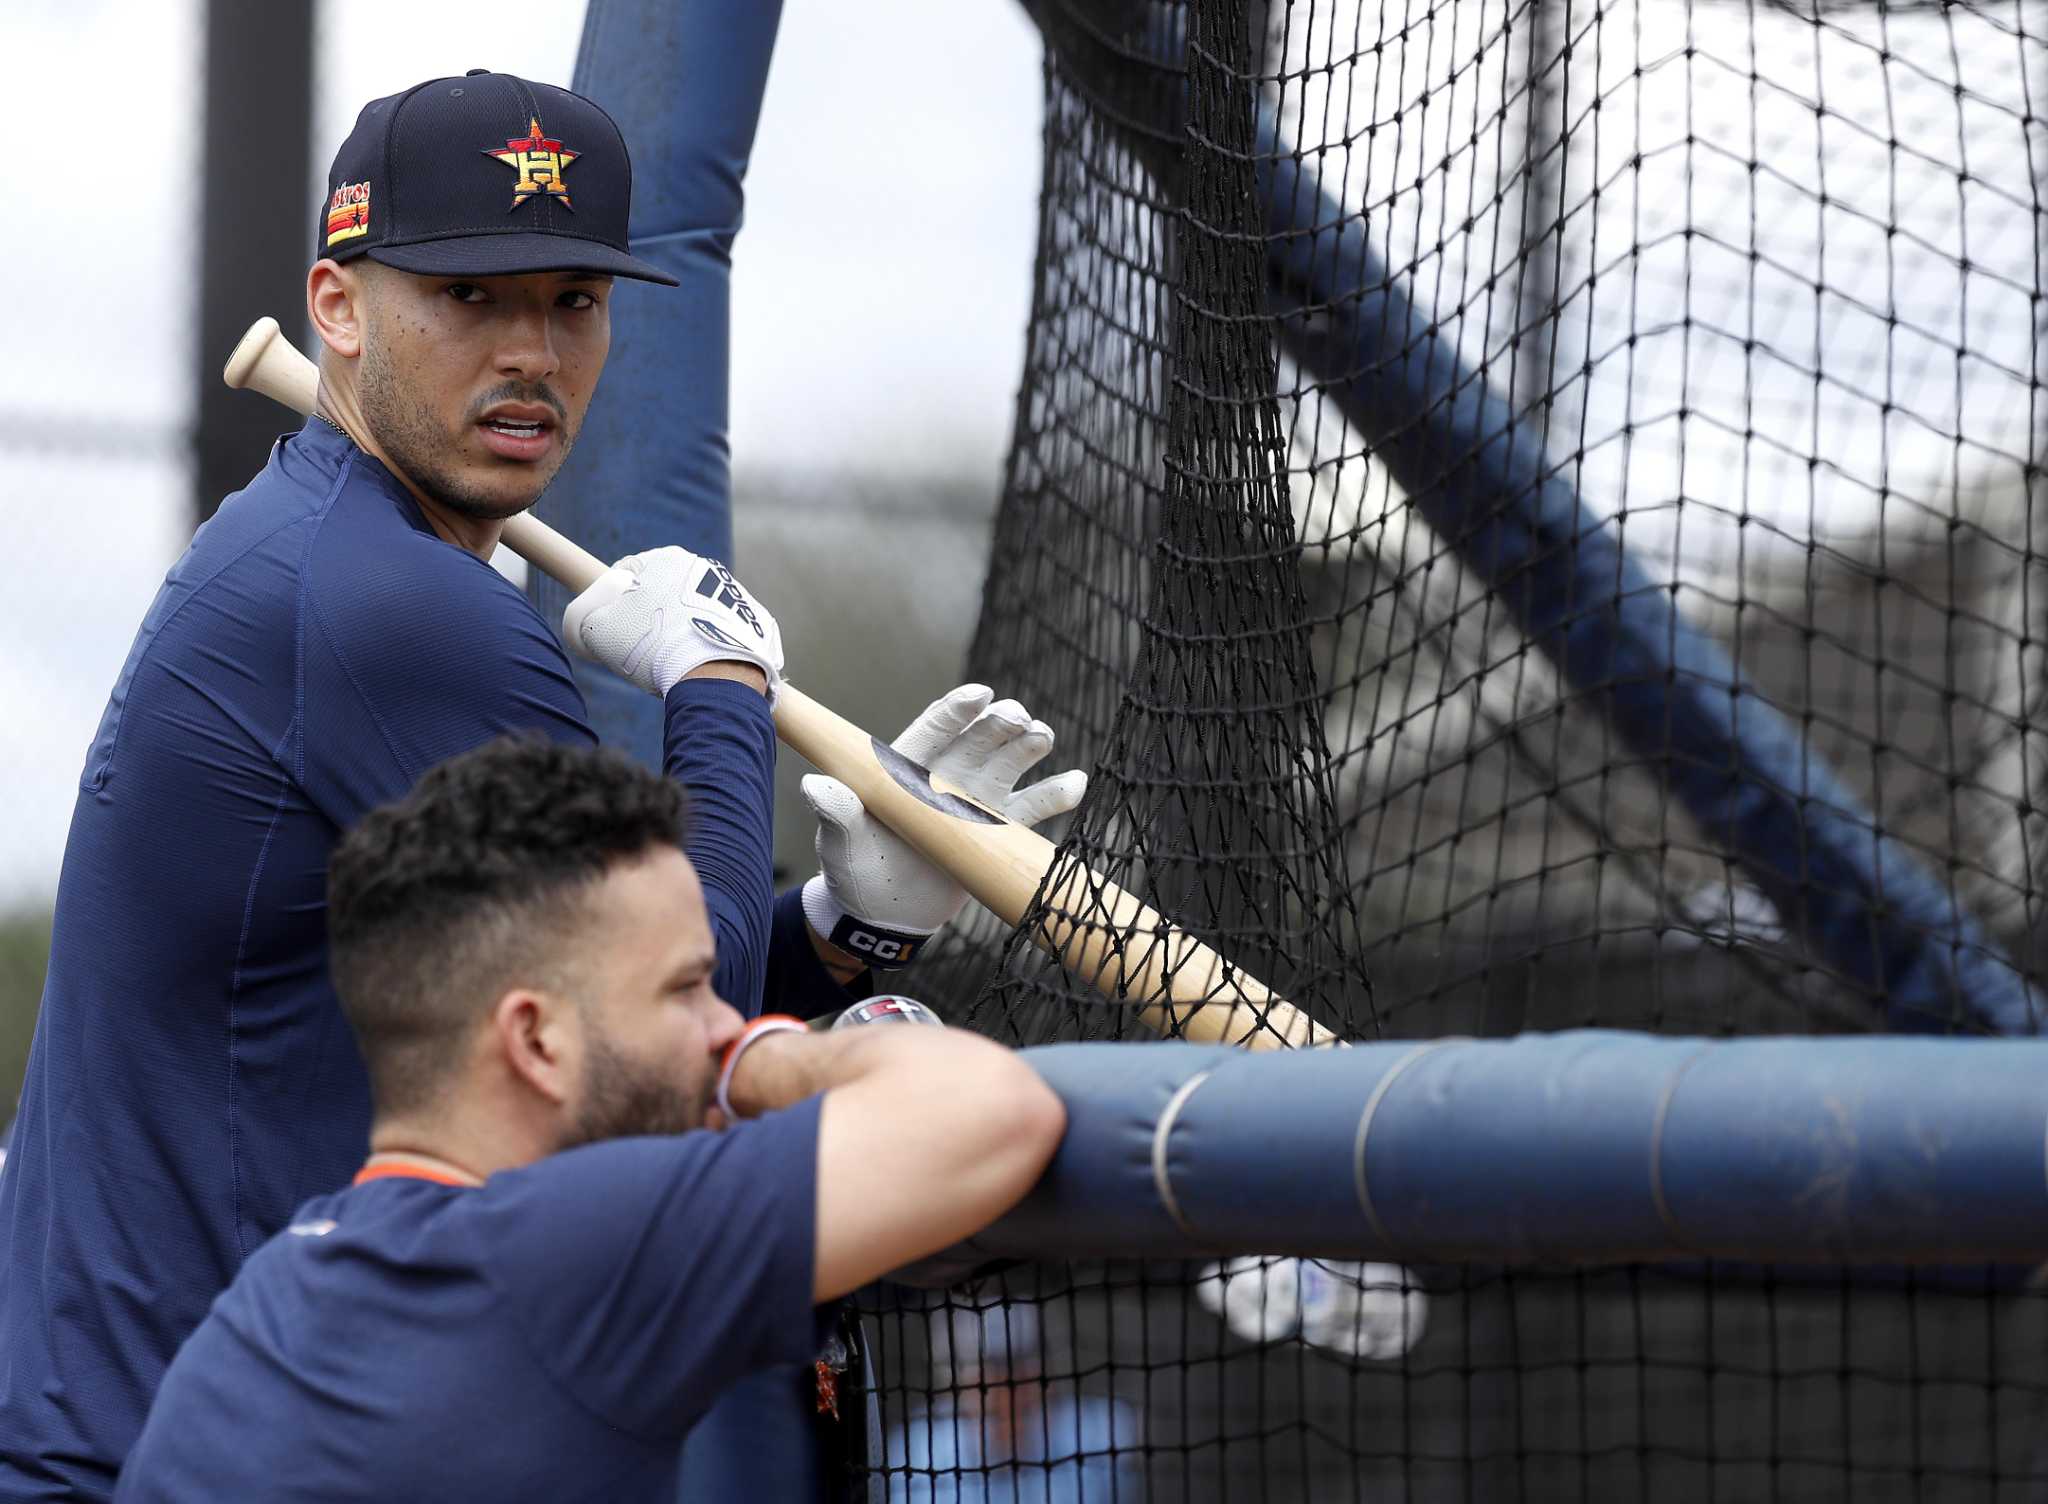 Everyone needs to see Jose Altuve's 'unfinished tattoo' that